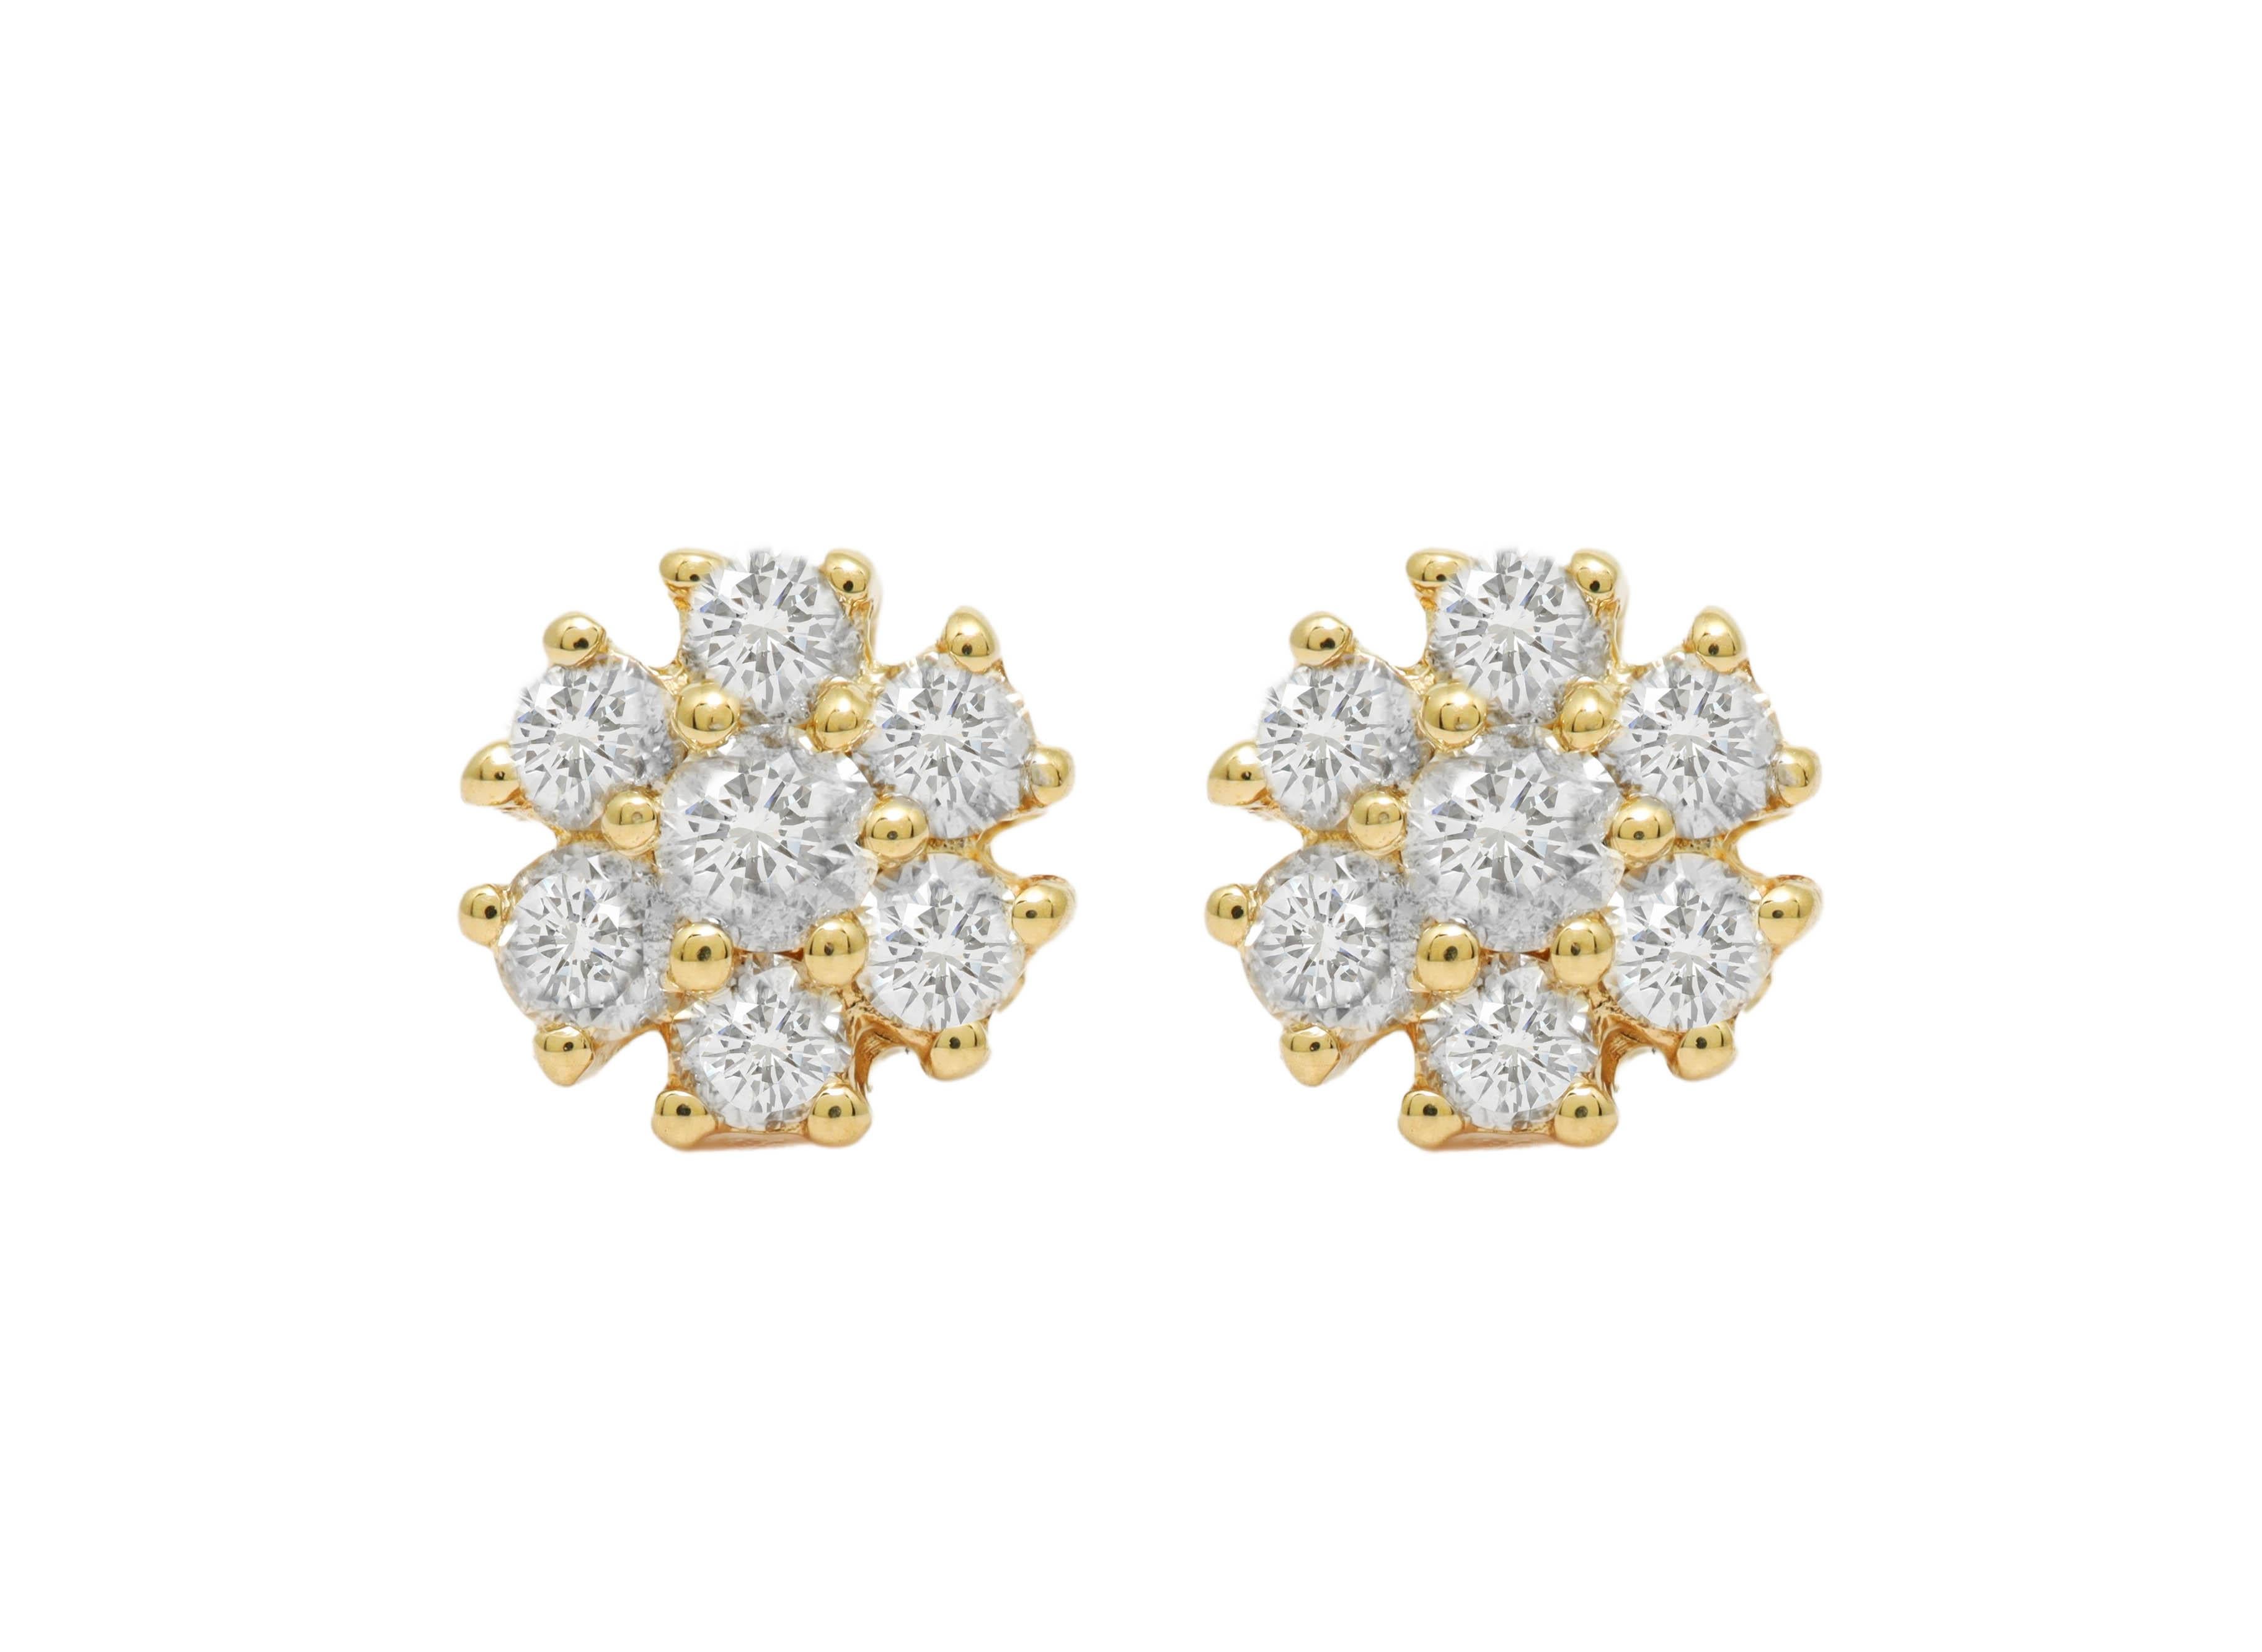 14K Yellow Gold Diamond Earrings featuring 0.50 Carats of Diamonds

Underline your look with this sharp 14K Yellow gold shape Diamond Earrings. High quality Diamonds. This Earrings will underline your exquisite look for any occasion.

. is a leading